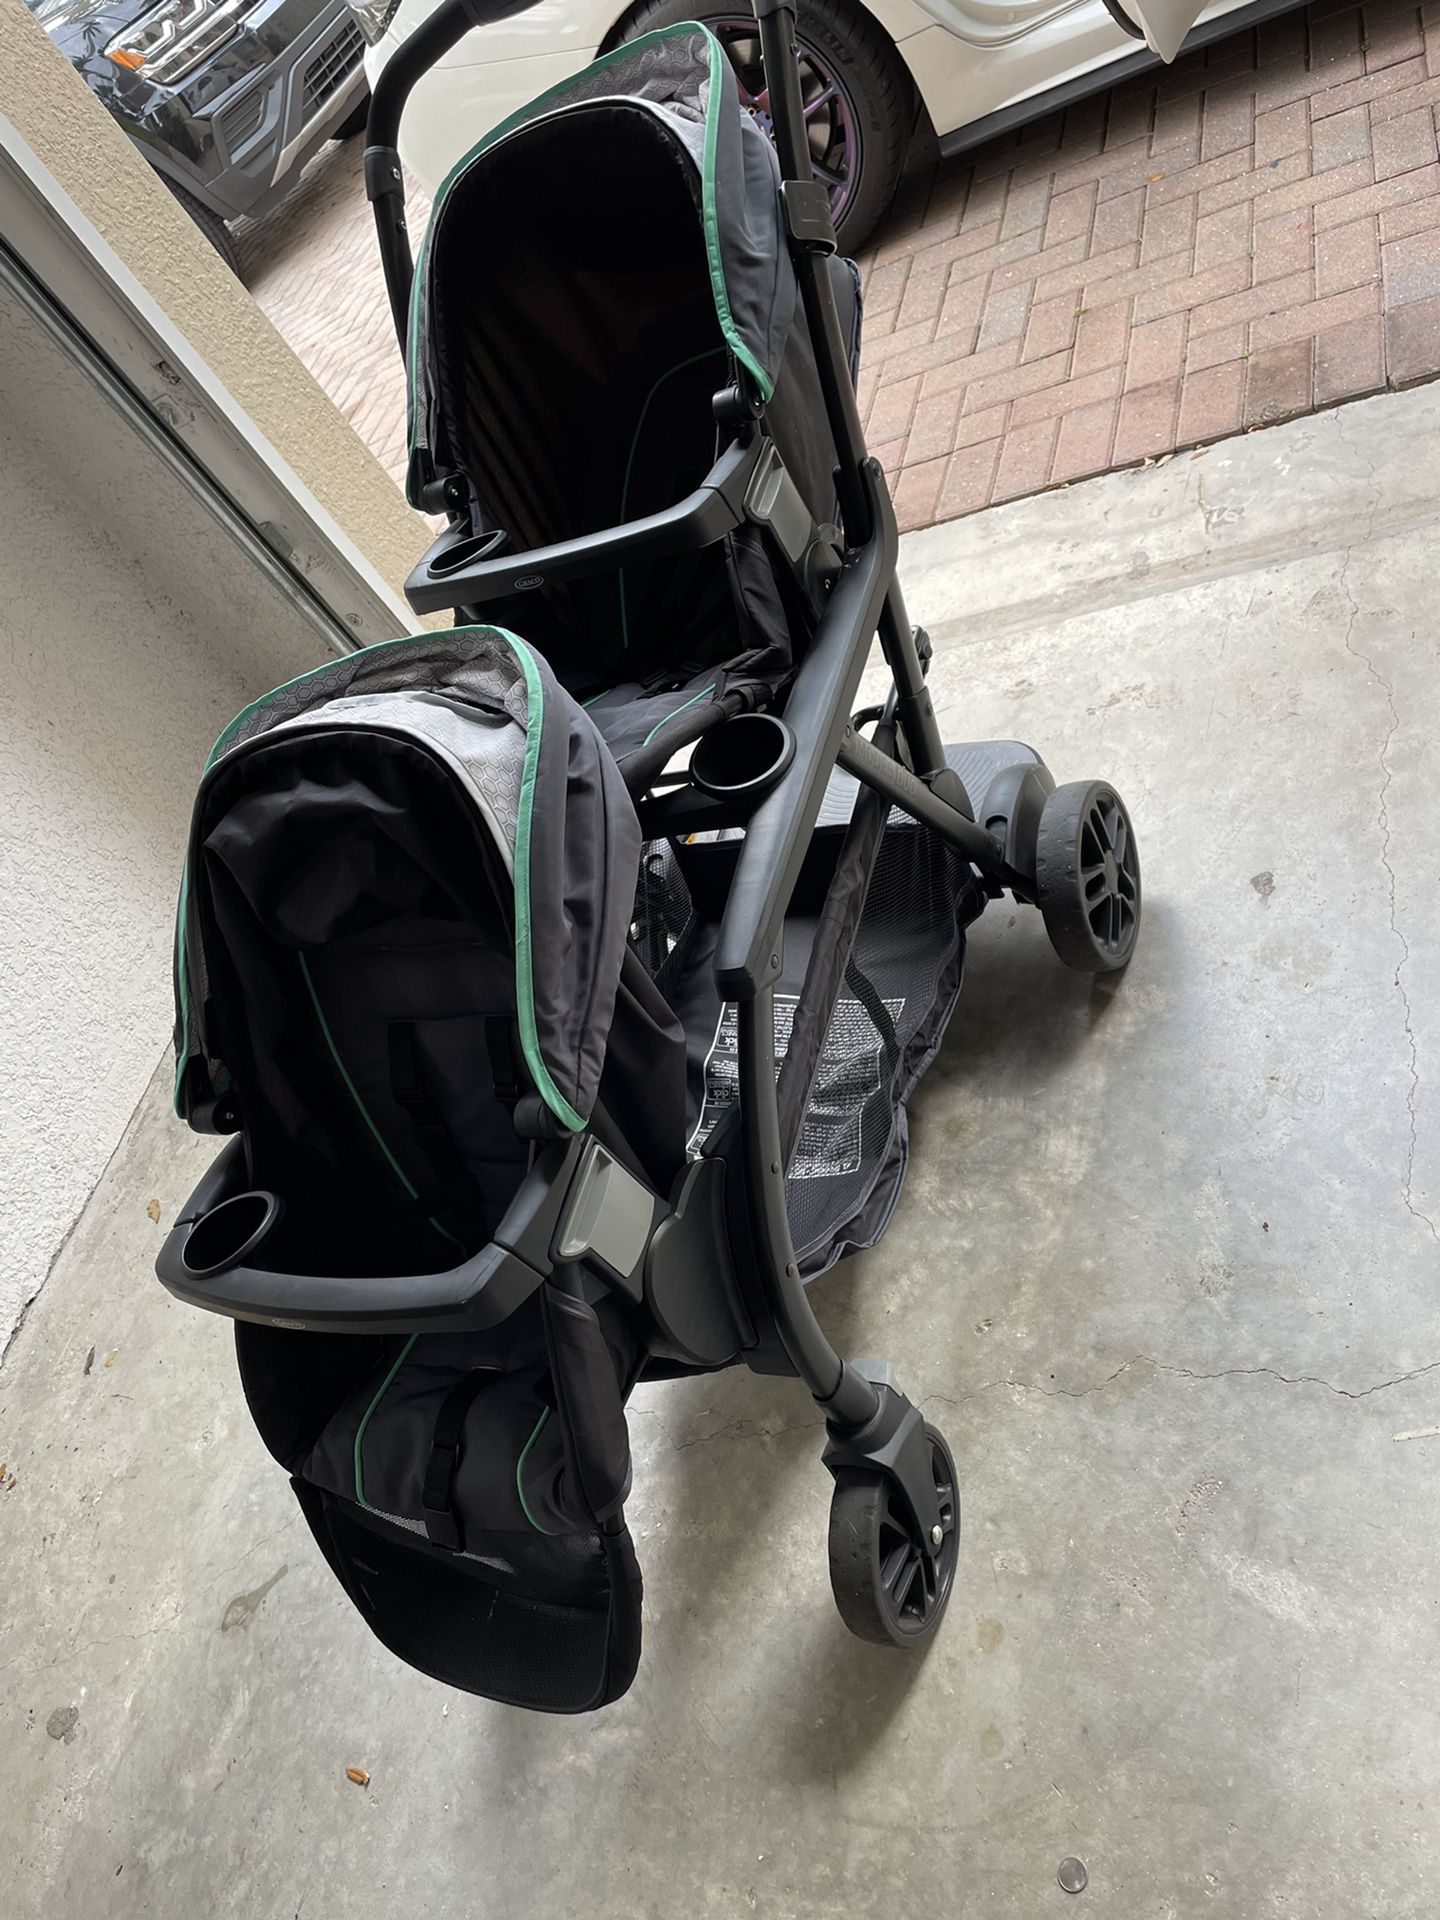 Graco Modes Duo Double Stroller | 27 Riding Options for 2 Kids, Basin